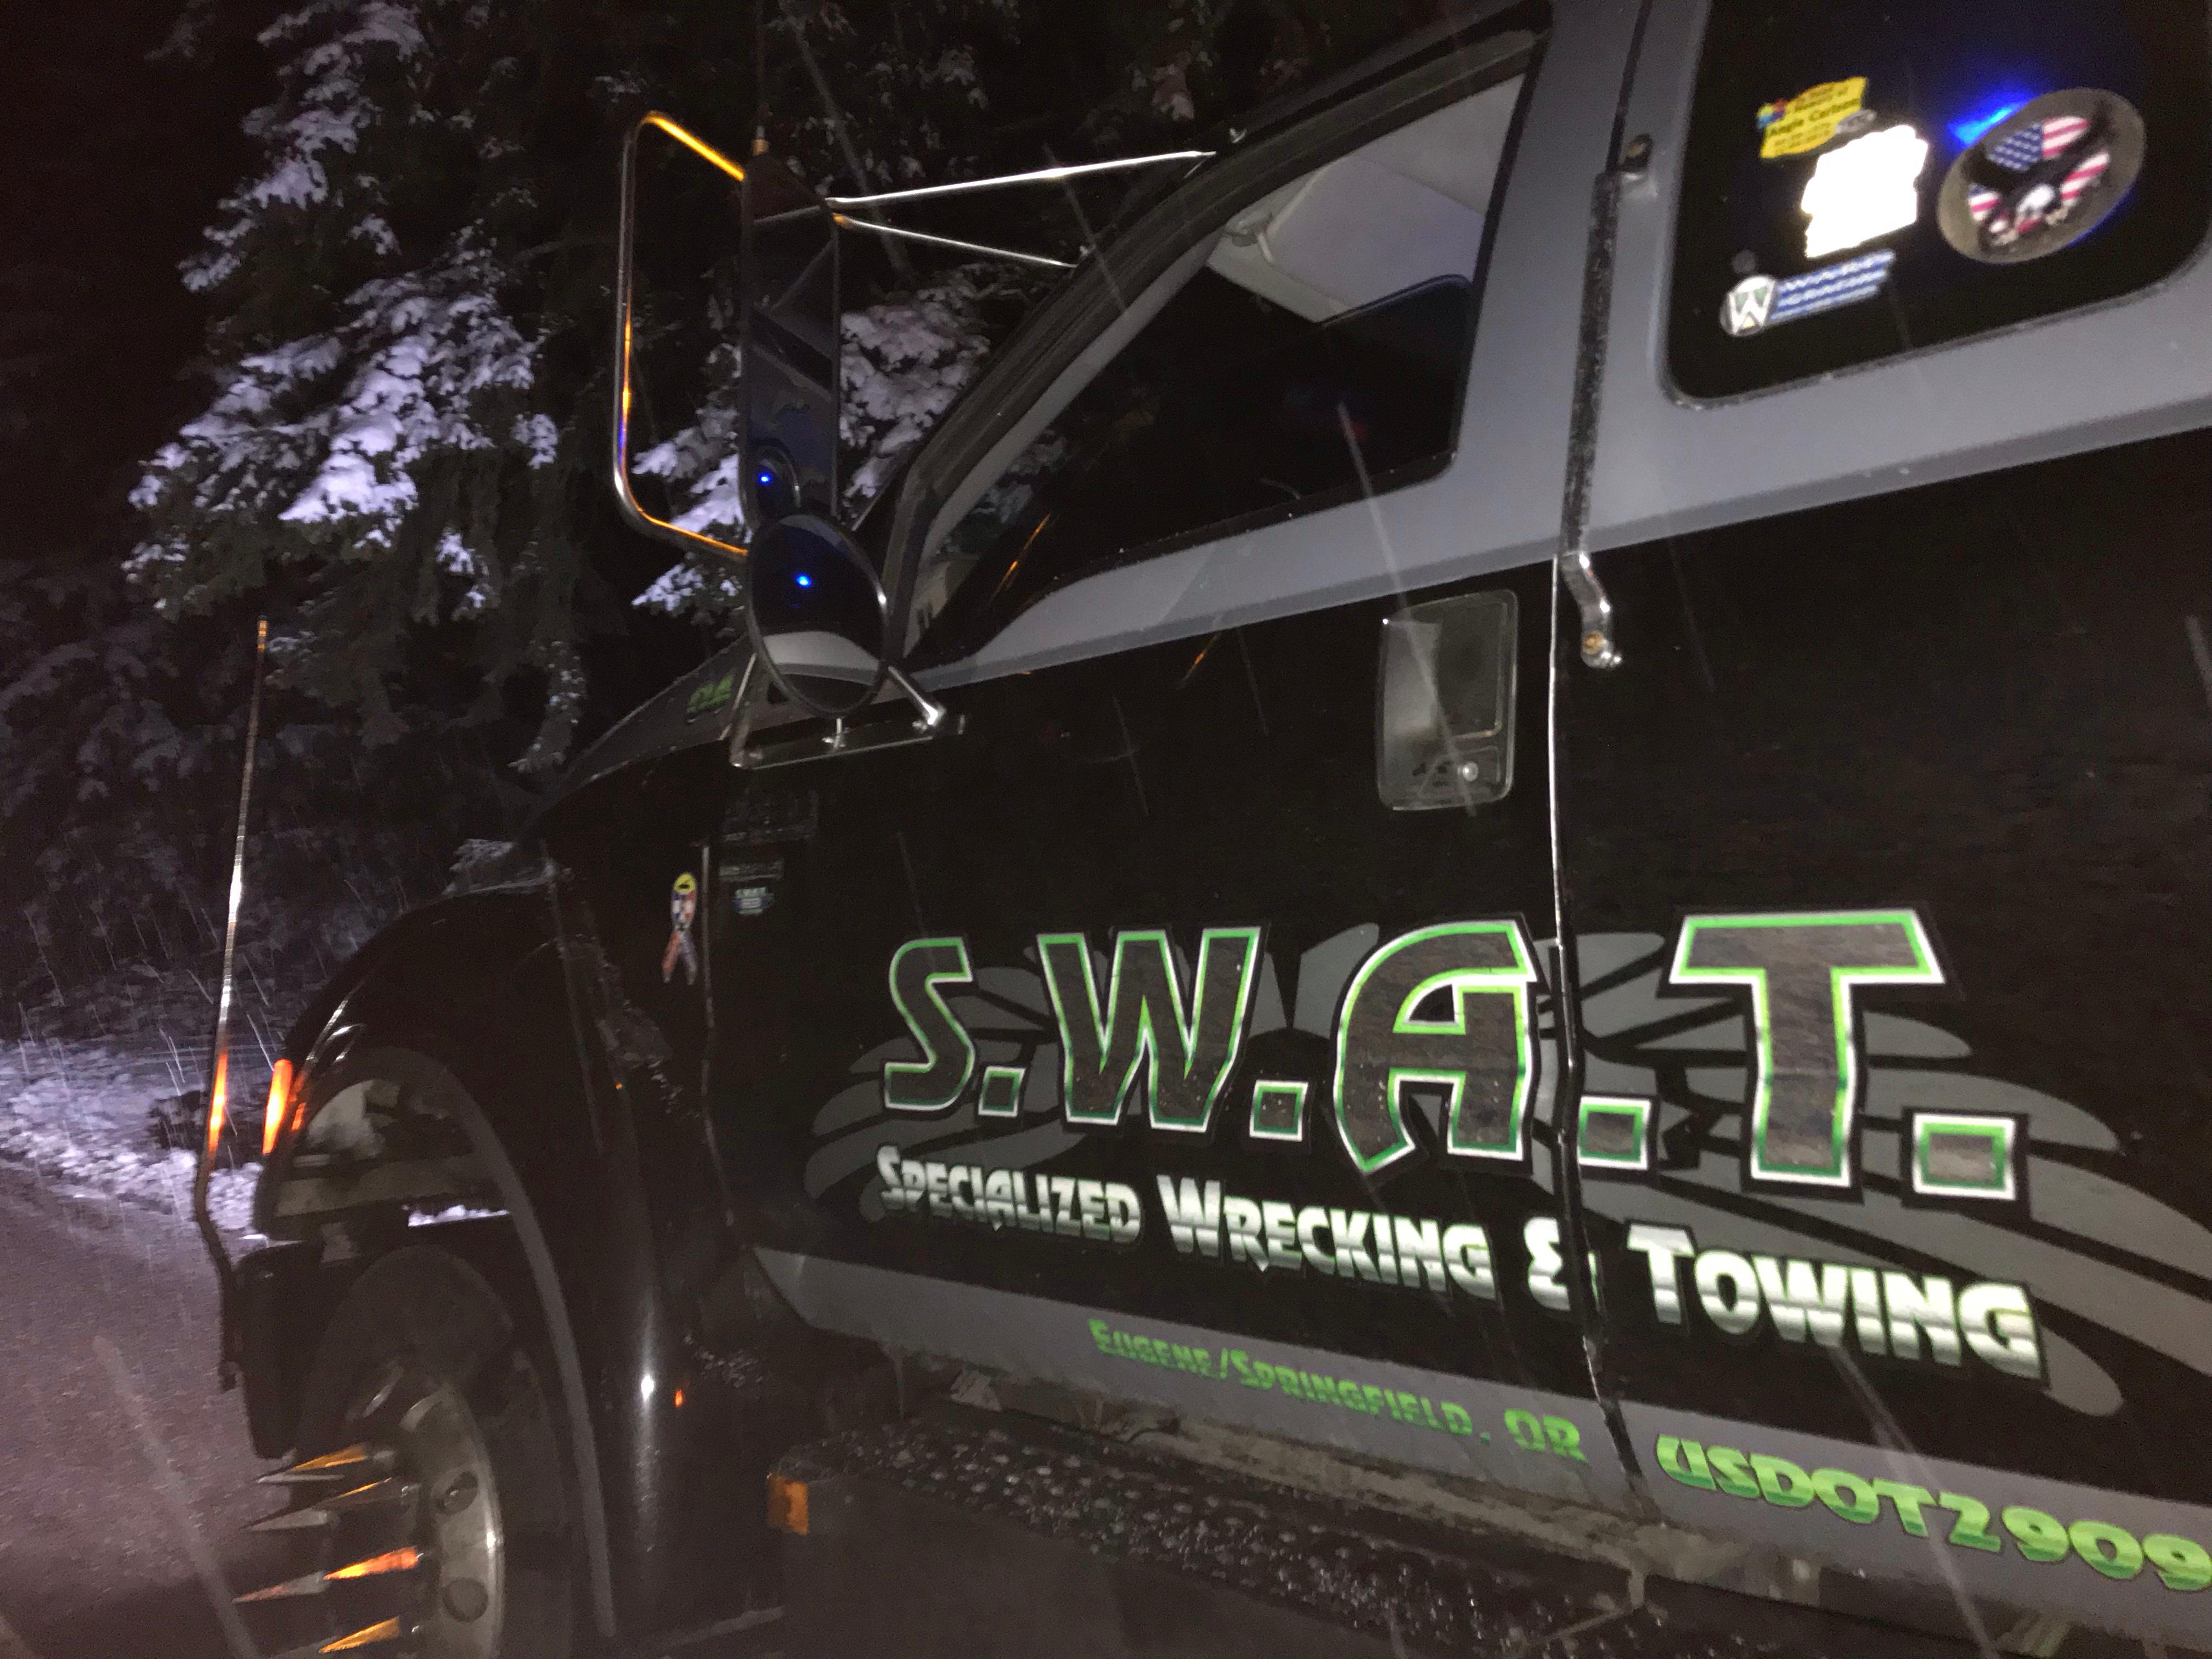 SWAT Specialized Wrecking & Towing Photo